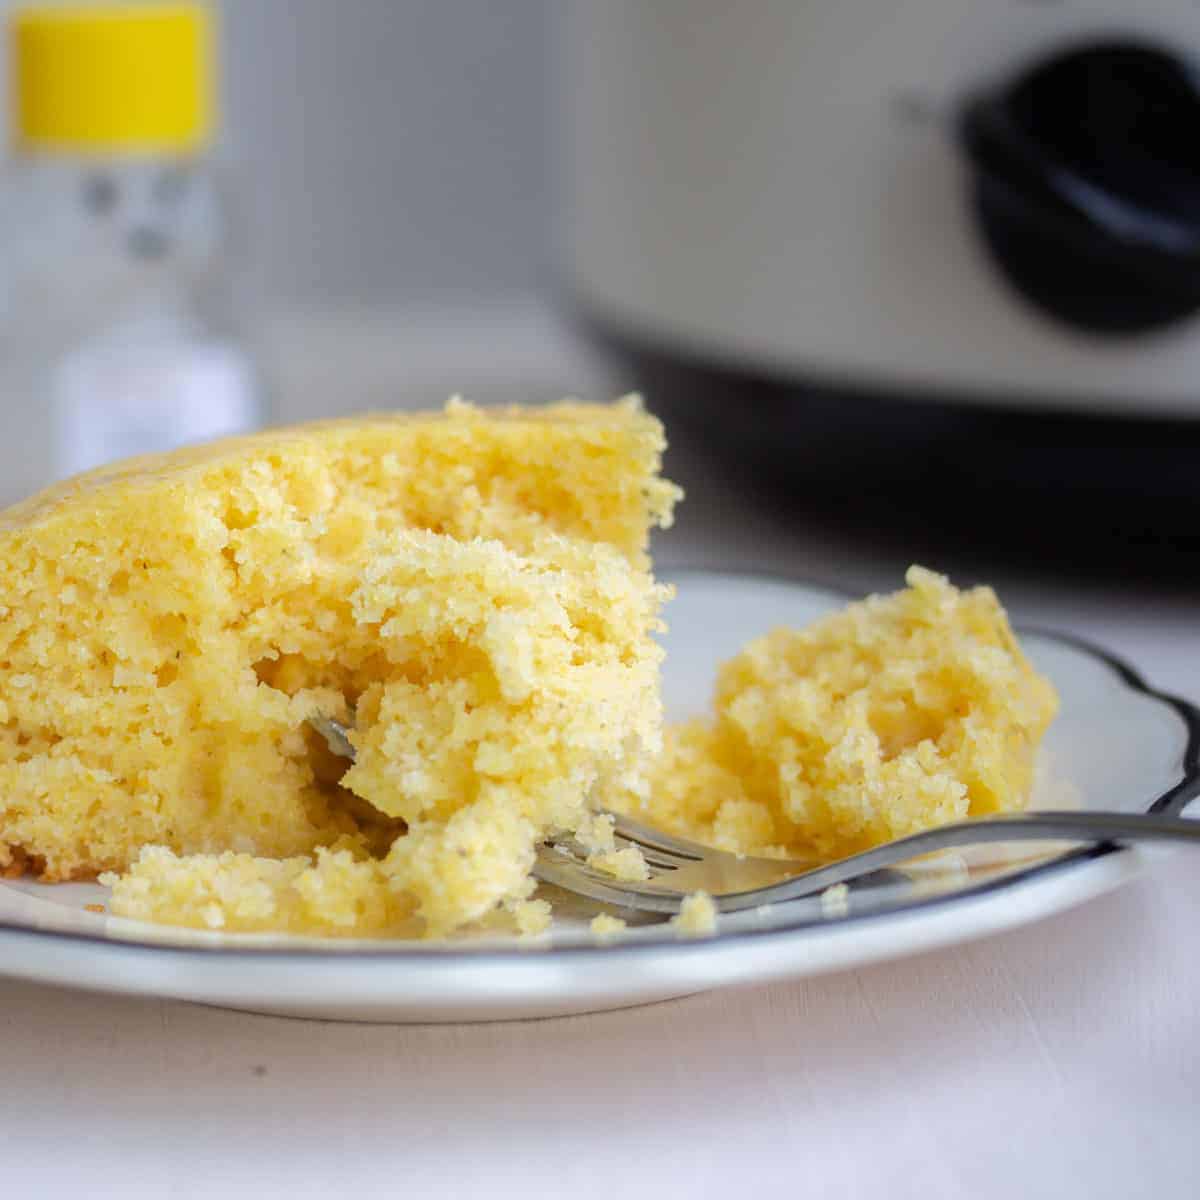 closeup pf cornbread on plate with slow cooker in background.